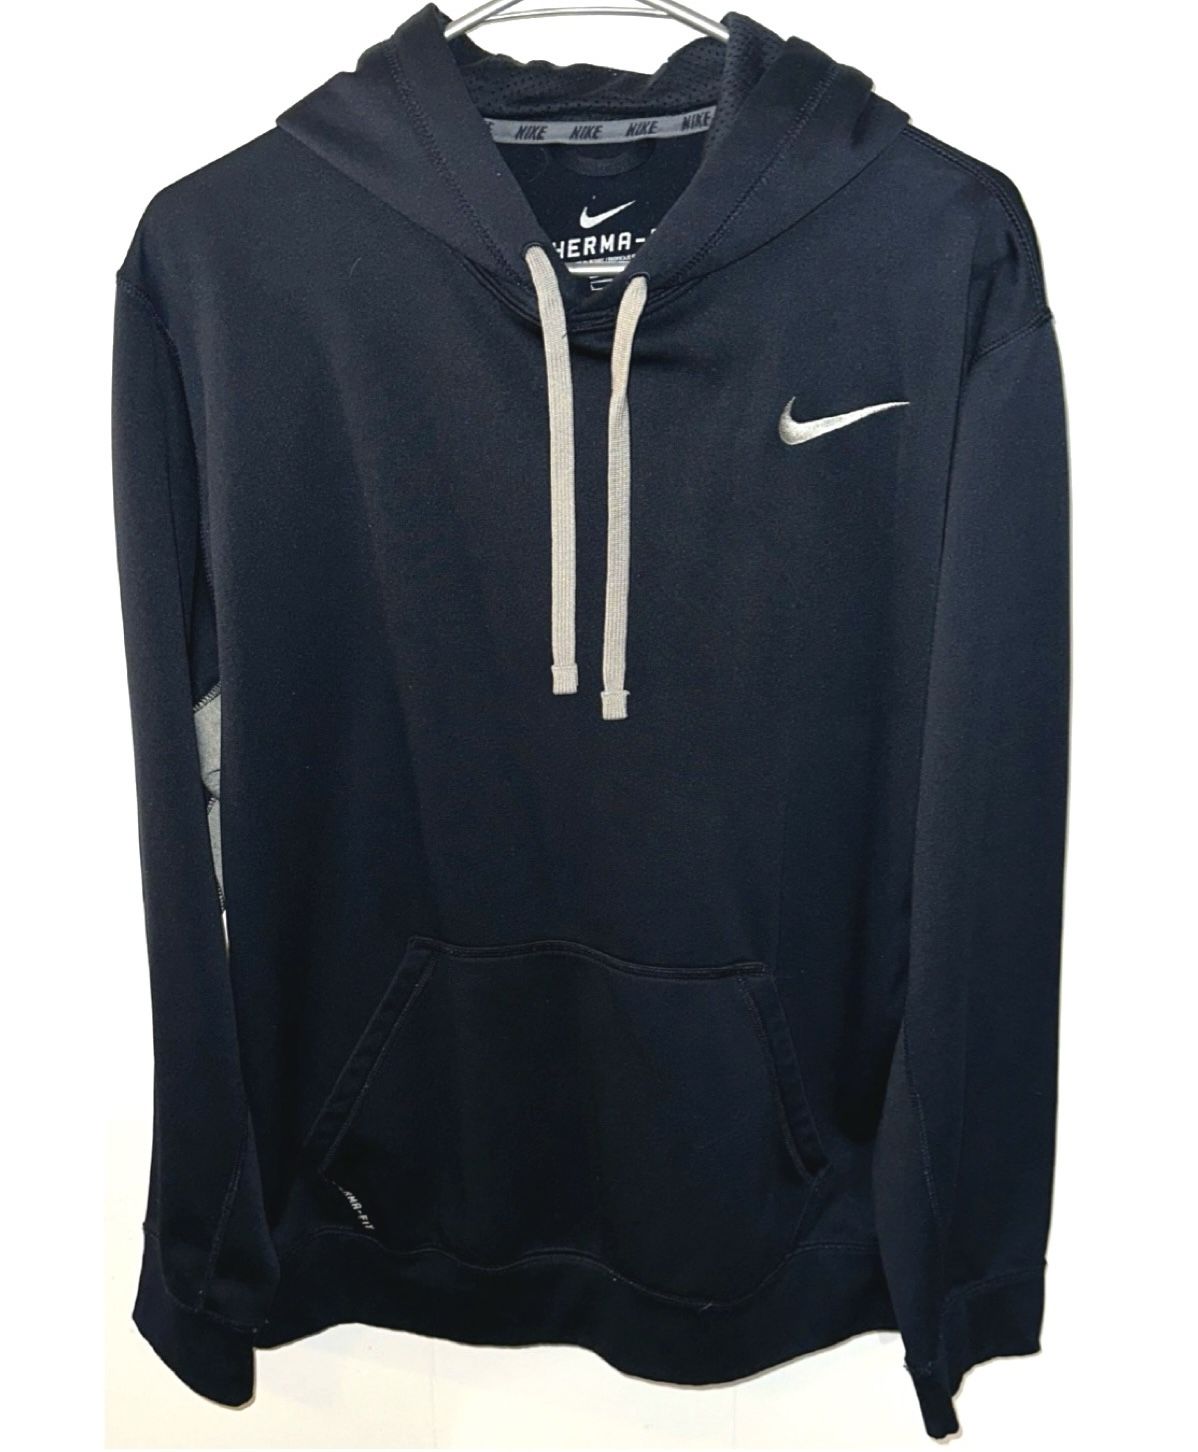 Men’s Nike Therma-Fit Pullover